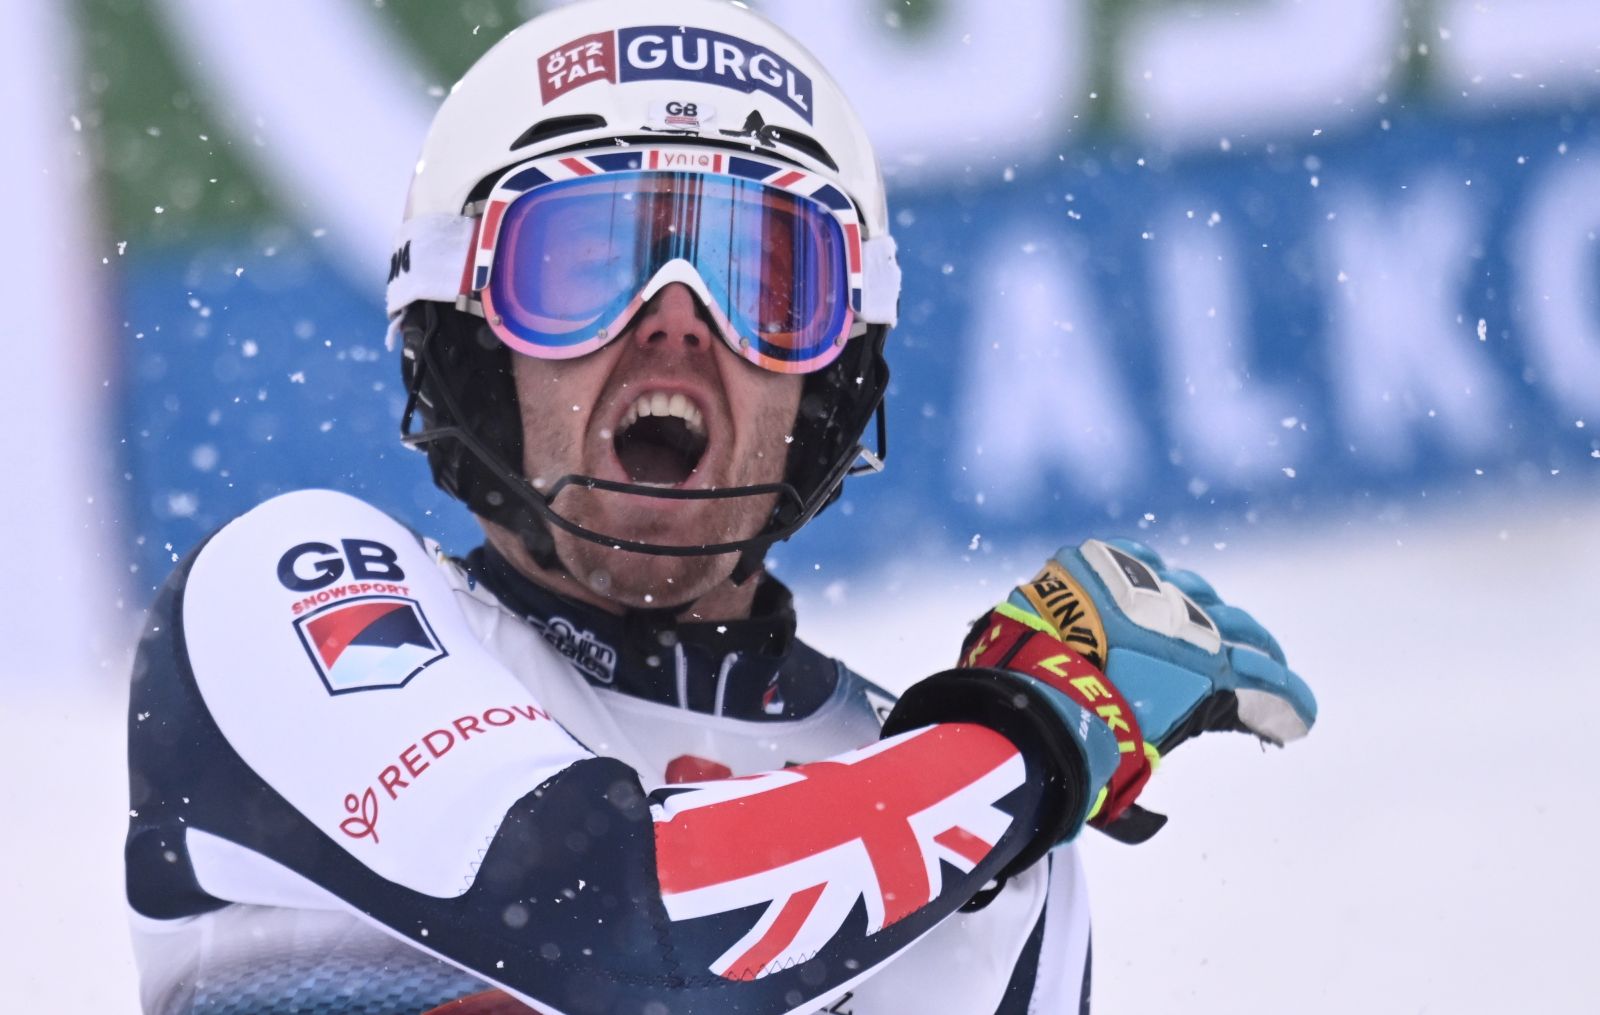 epa09702092 Winner Dave Ryding of Britain celebrates after the men's Slalom race of the FIS Alpine Skiing World Cup event in Kitzbuehel, Austria, 22 January 2022.  EPA/CHRISTIAN BRUNA